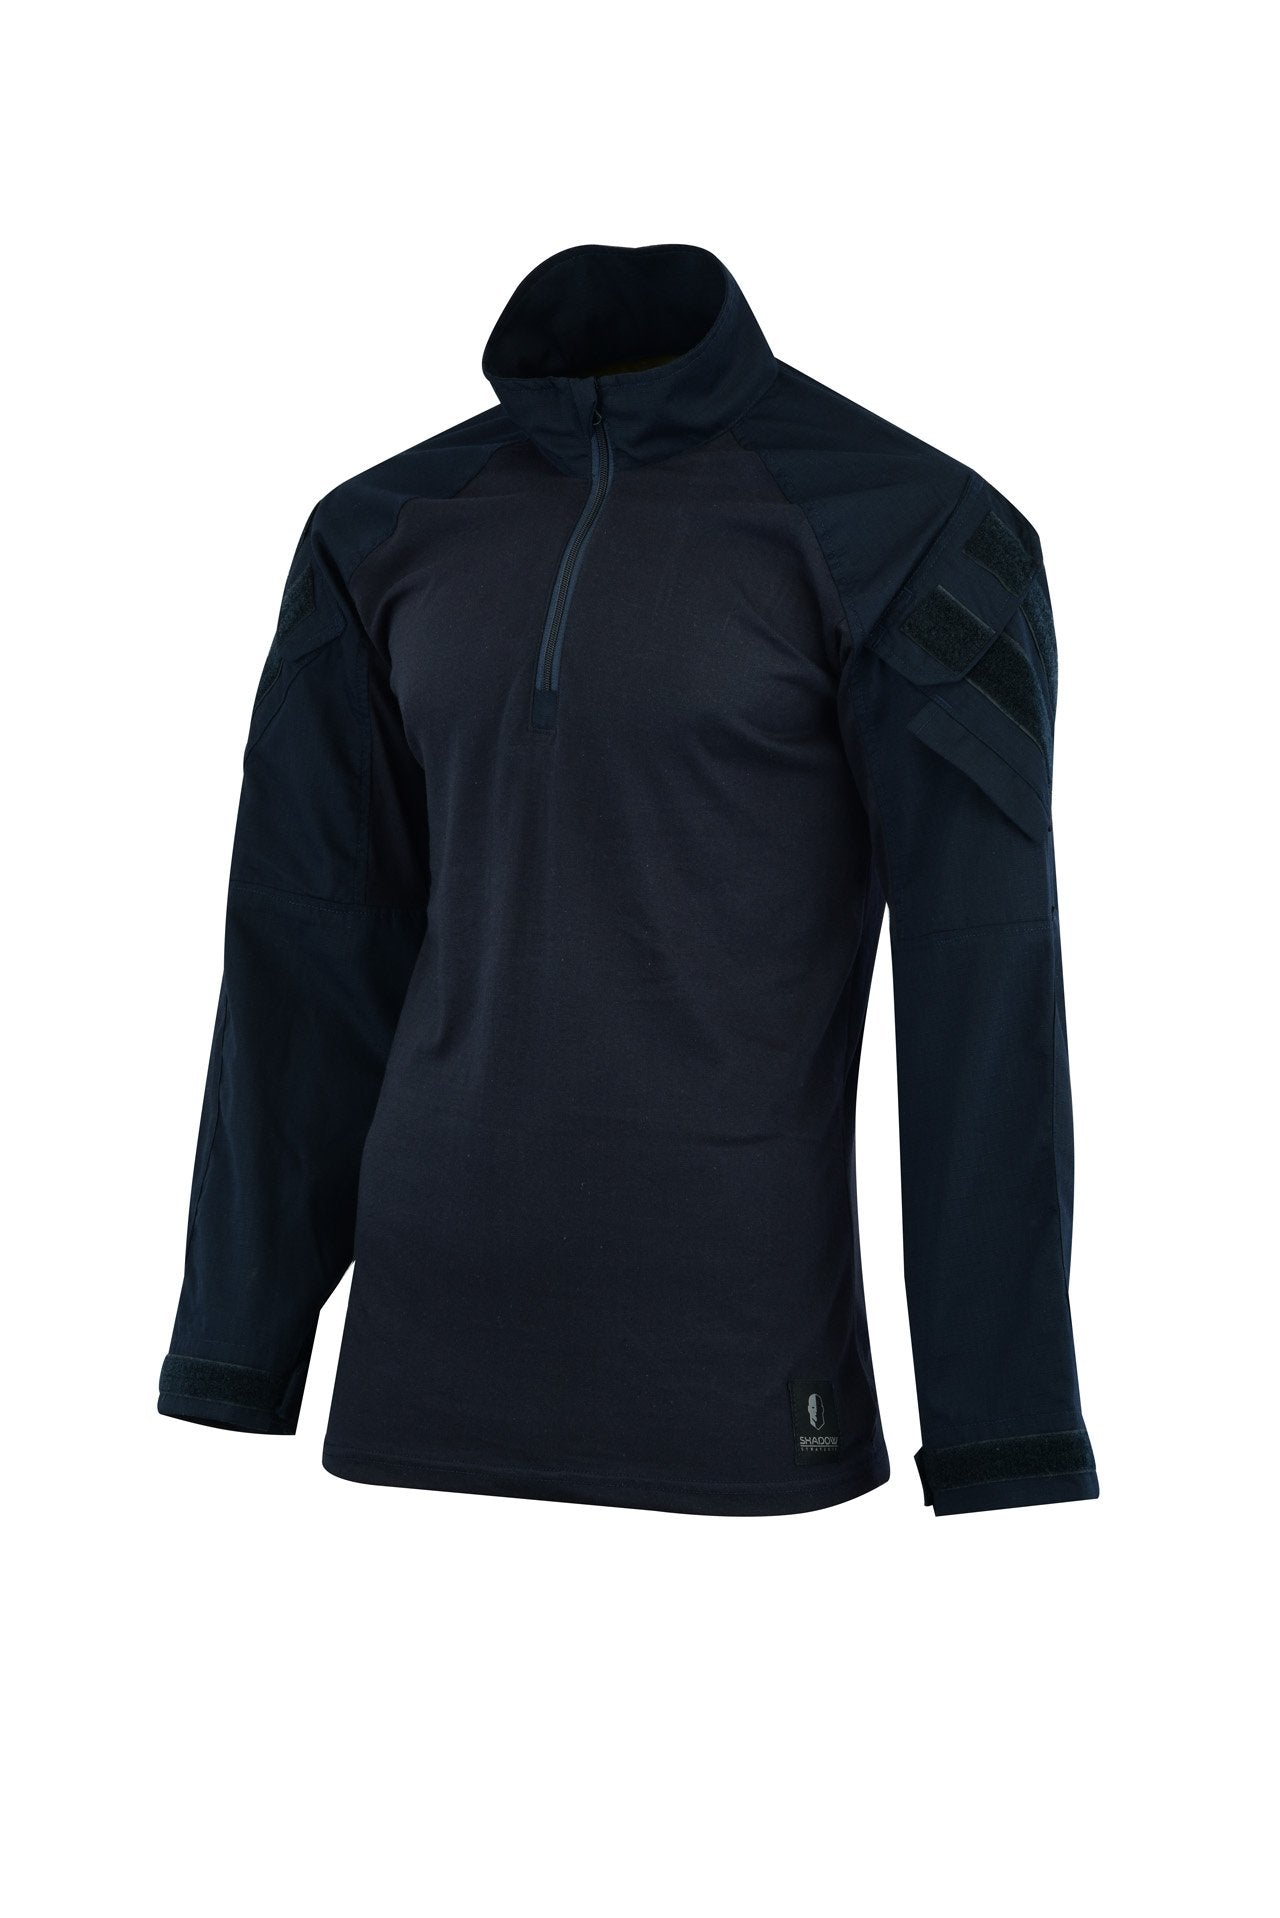 Tactical Zone HYBRID TACTICAL SHIRT IS A PERFECT COMBAT SHIRT Colour  Navy Blue side